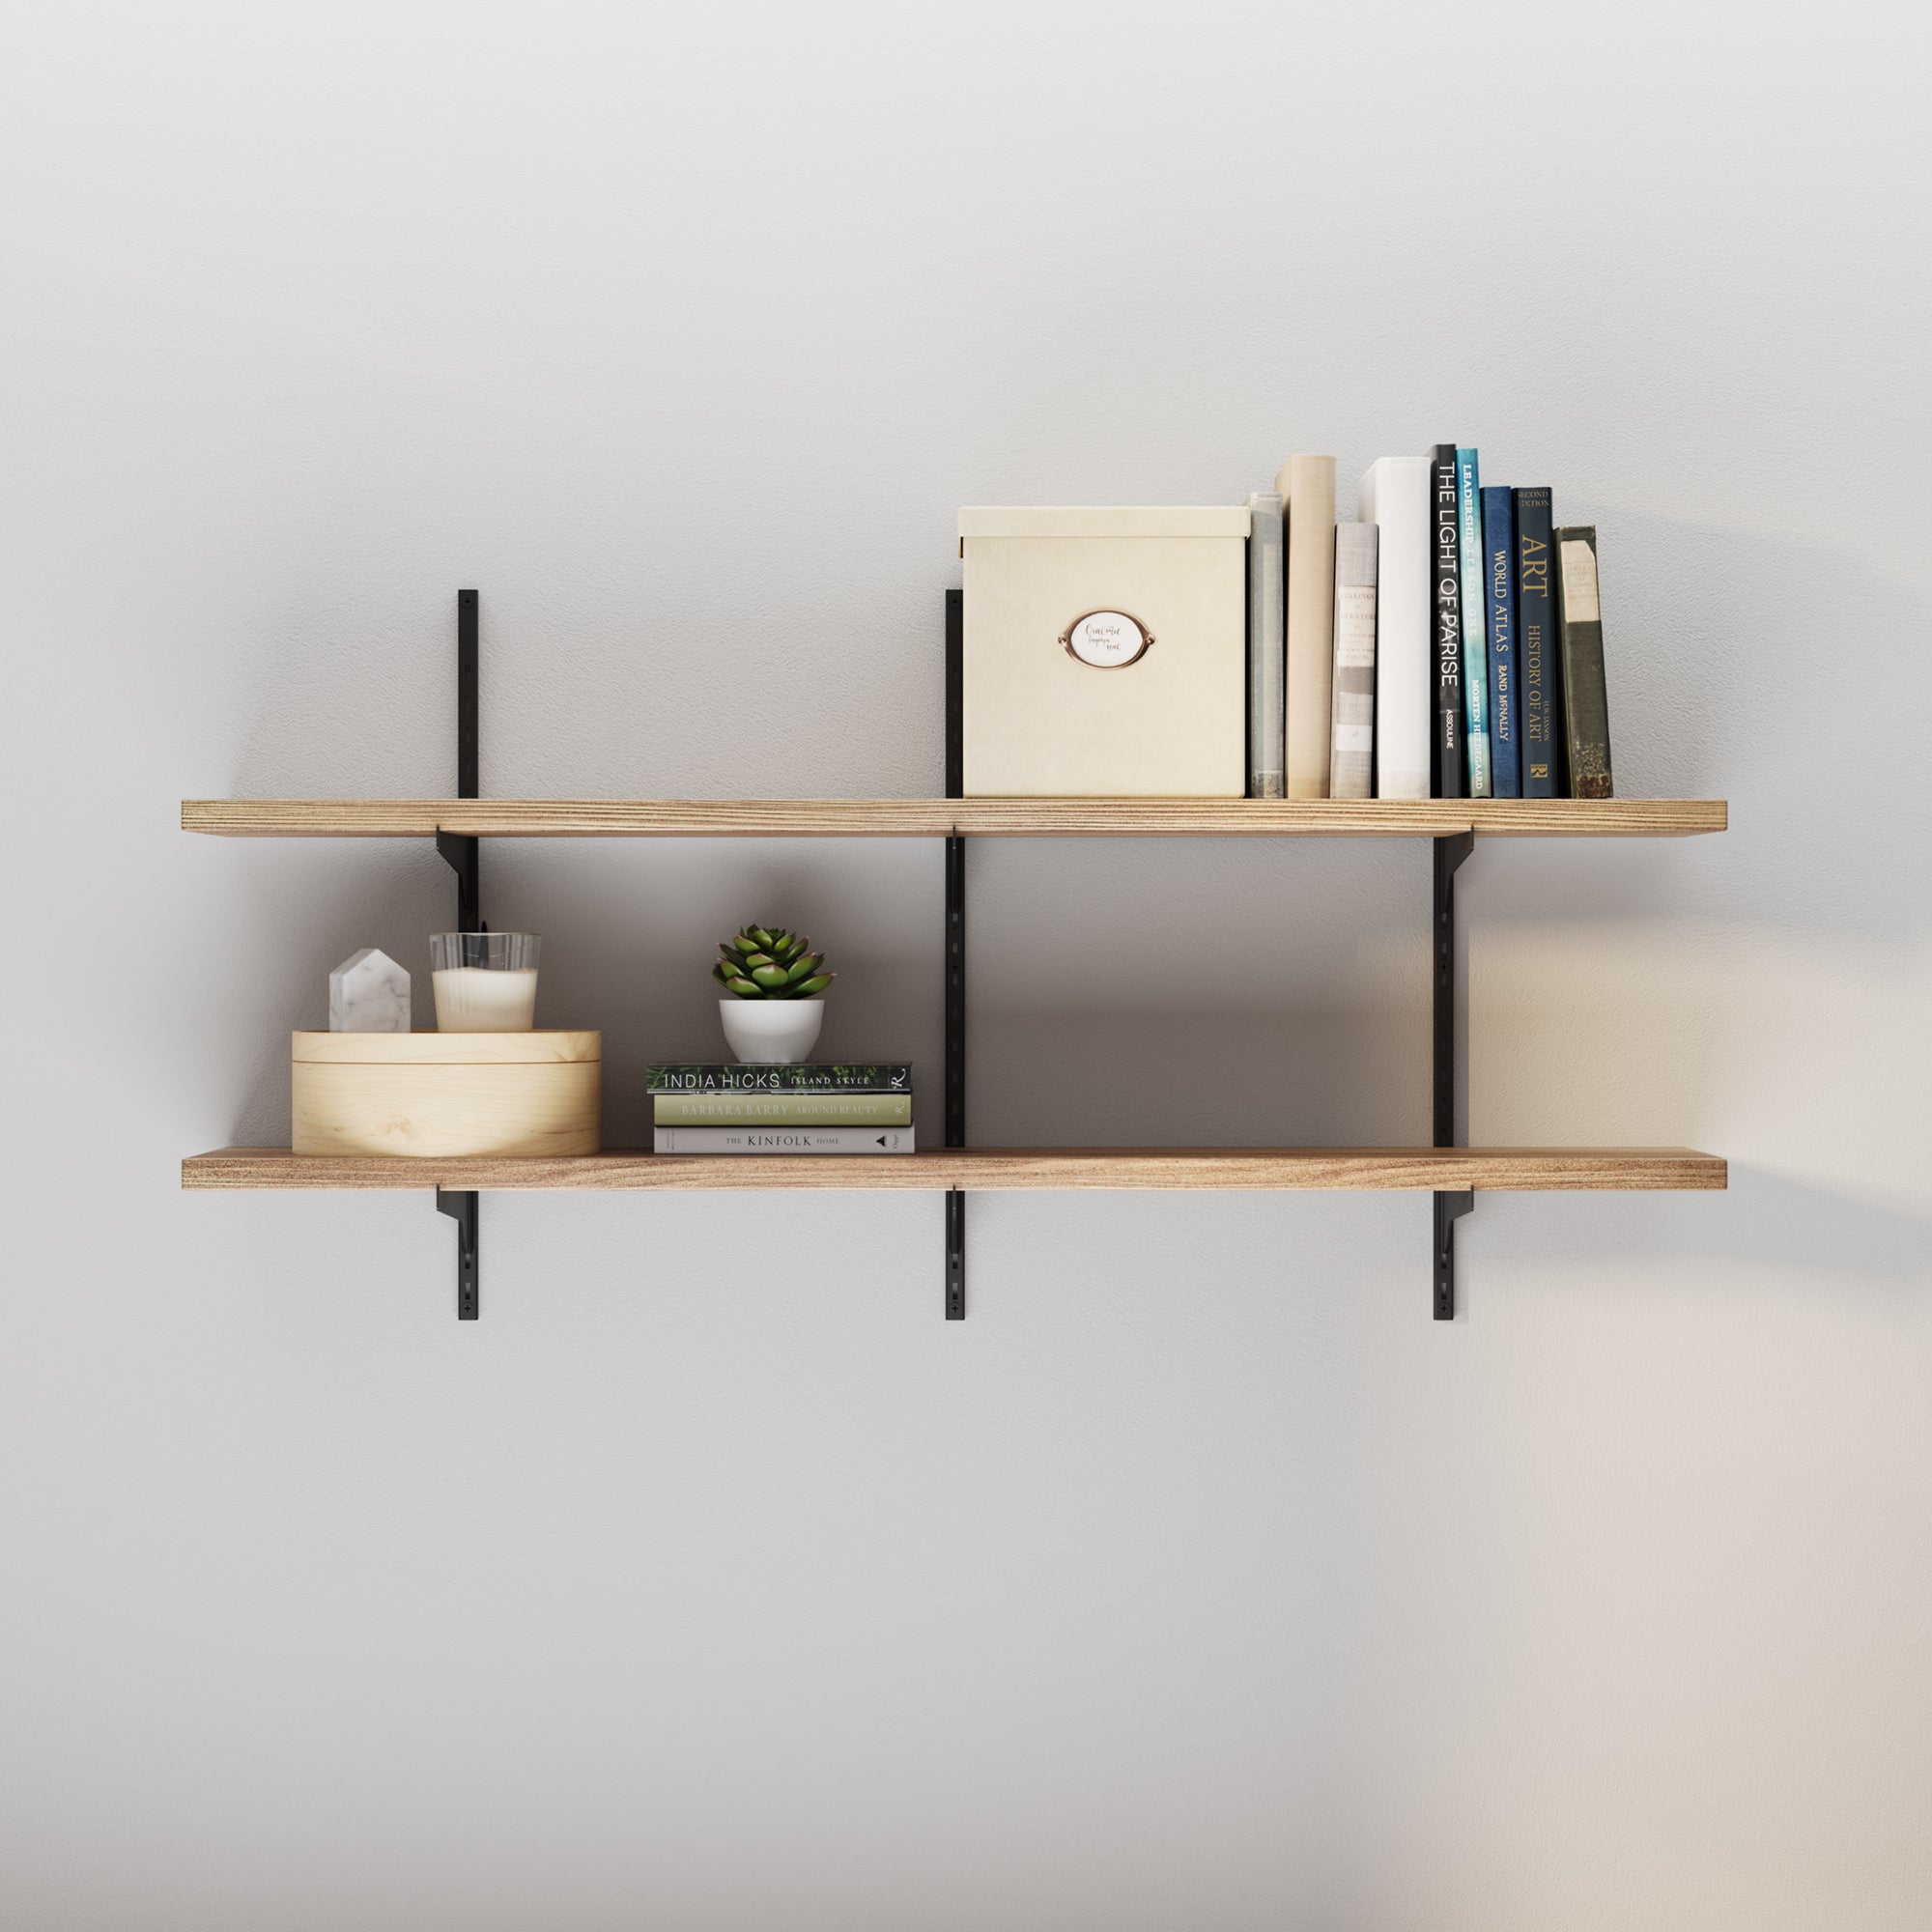 48'' decorative shelving unit styled with books, decorative items, and a small plant, showcasing an organized and aesthetic arrangement.